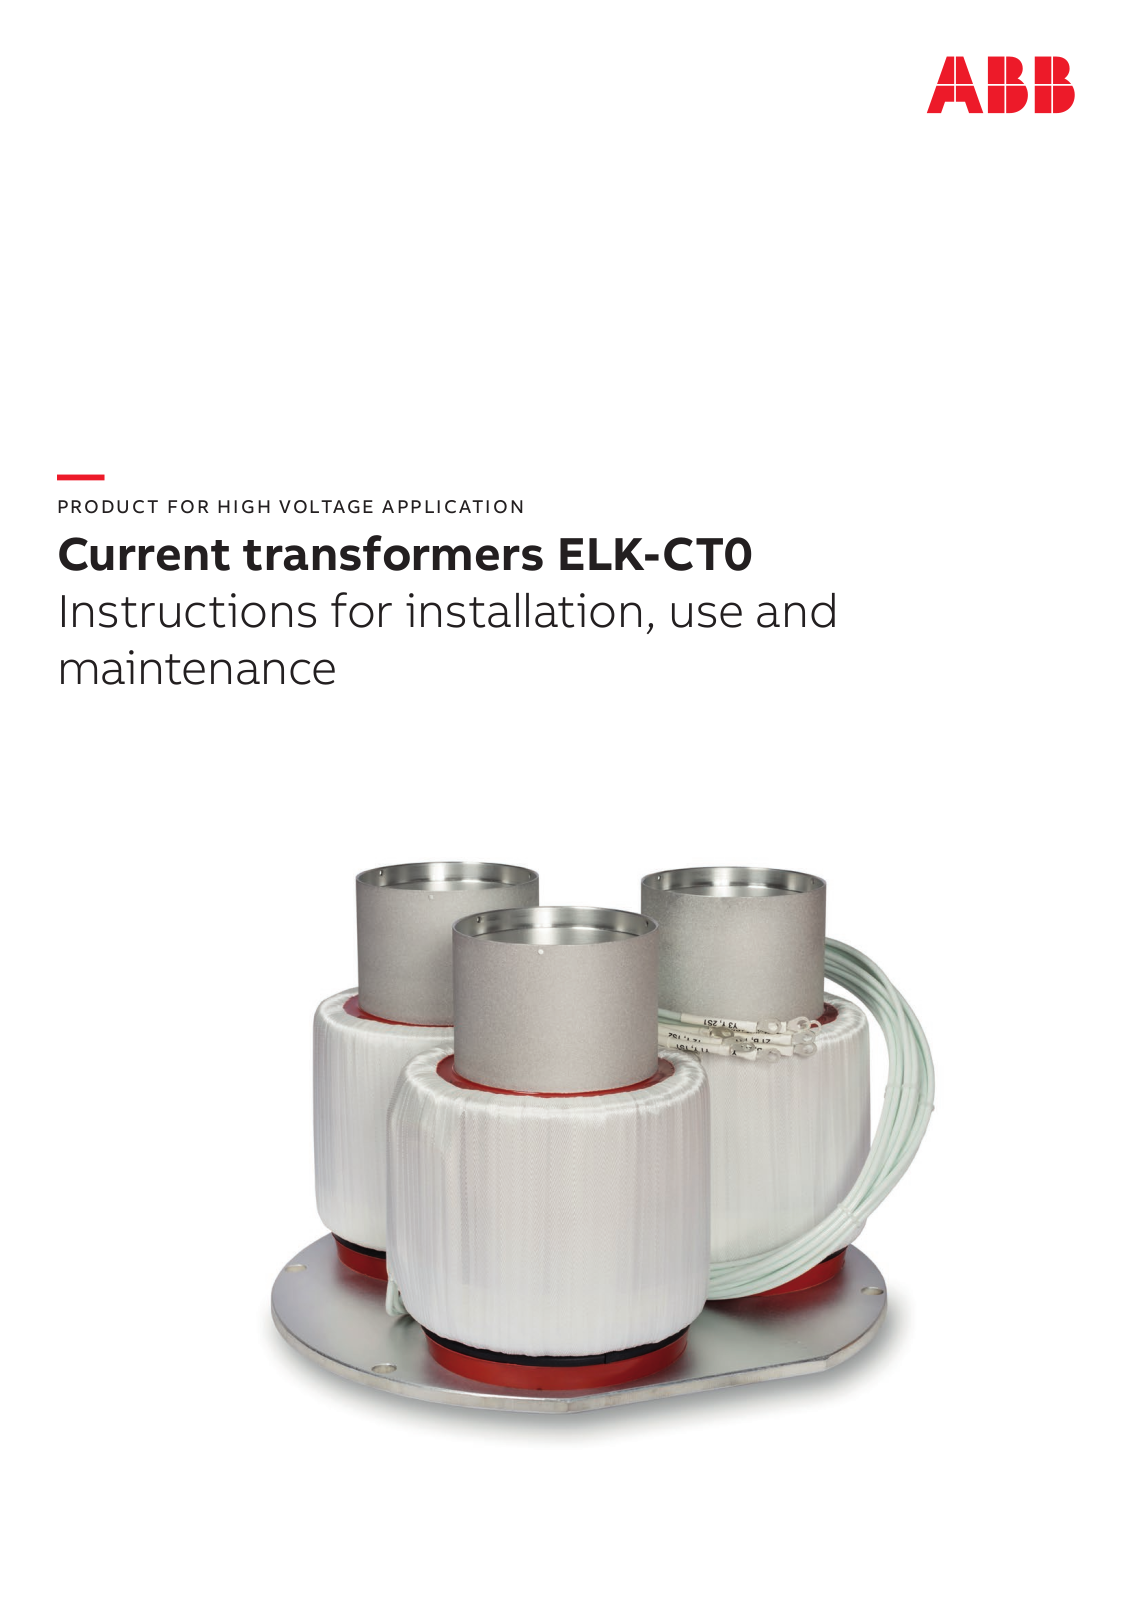 ABB ELK-CT0 735 FG, ELK-CT0 145 F, ELK-CT0 520 LK, ELK-CT0 735 F, ELK-CT0 170 F Instructions For Installation, Use And Maintenance Manual